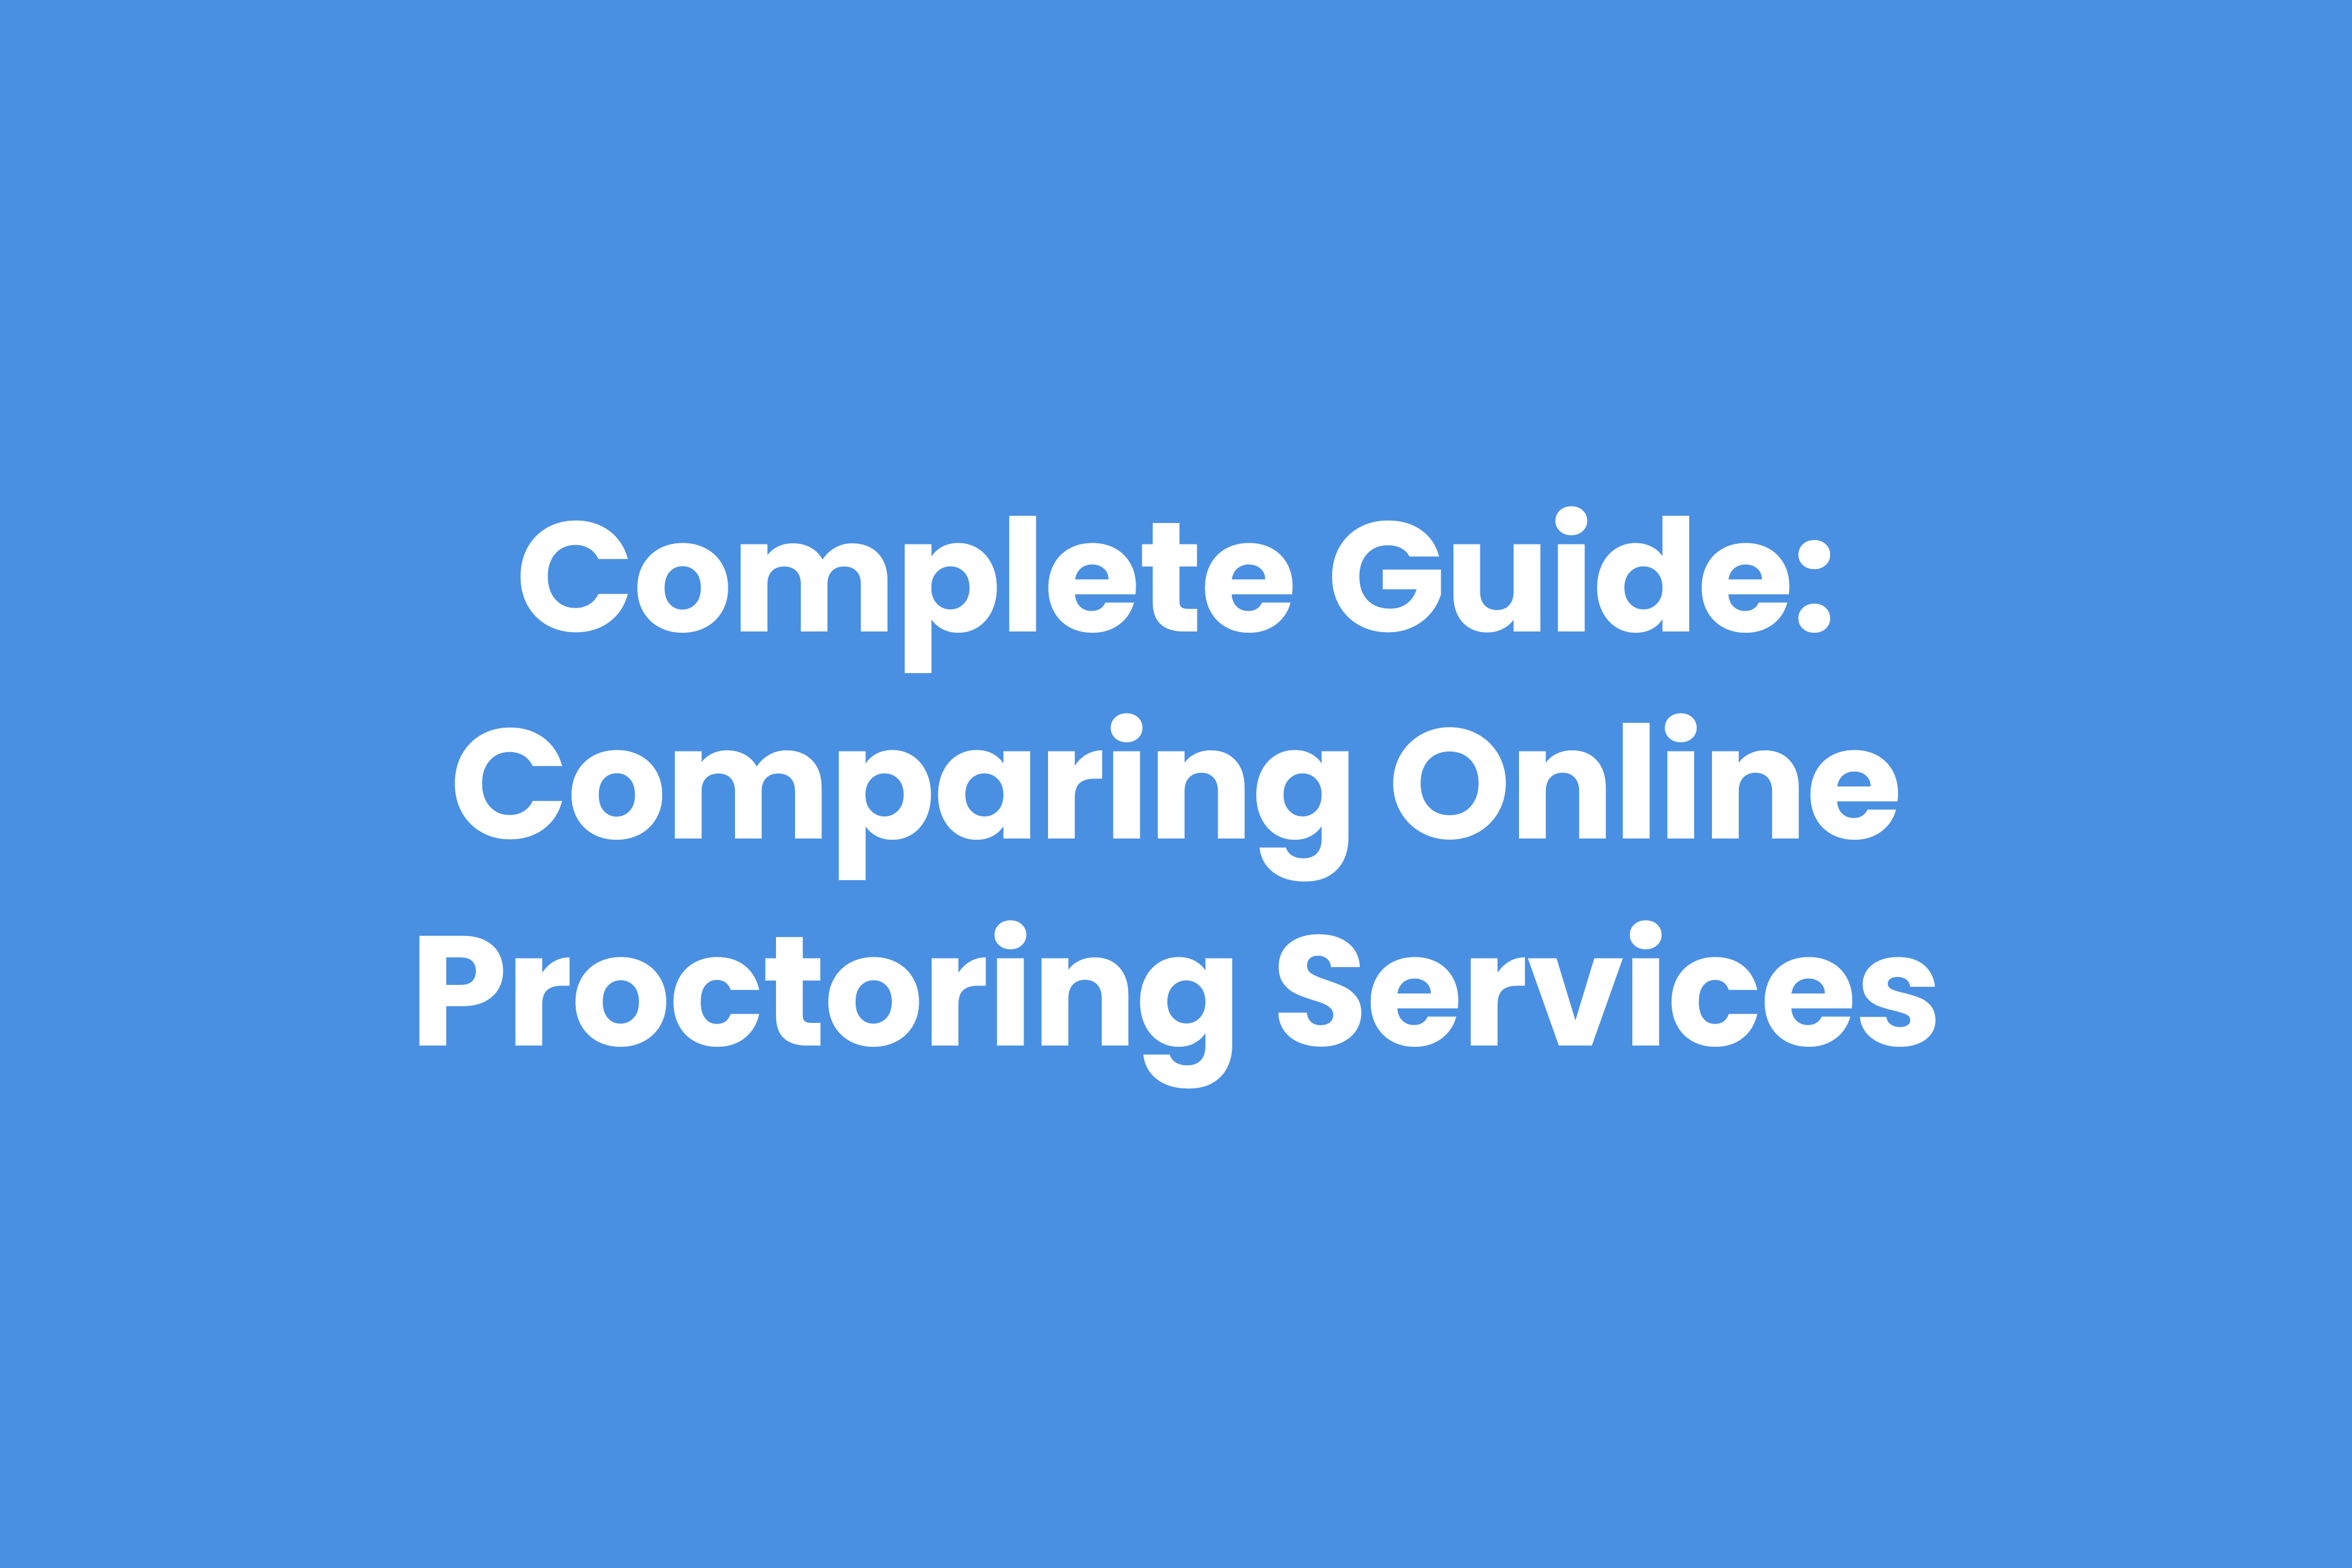 Guide for comparing different online proctoring services